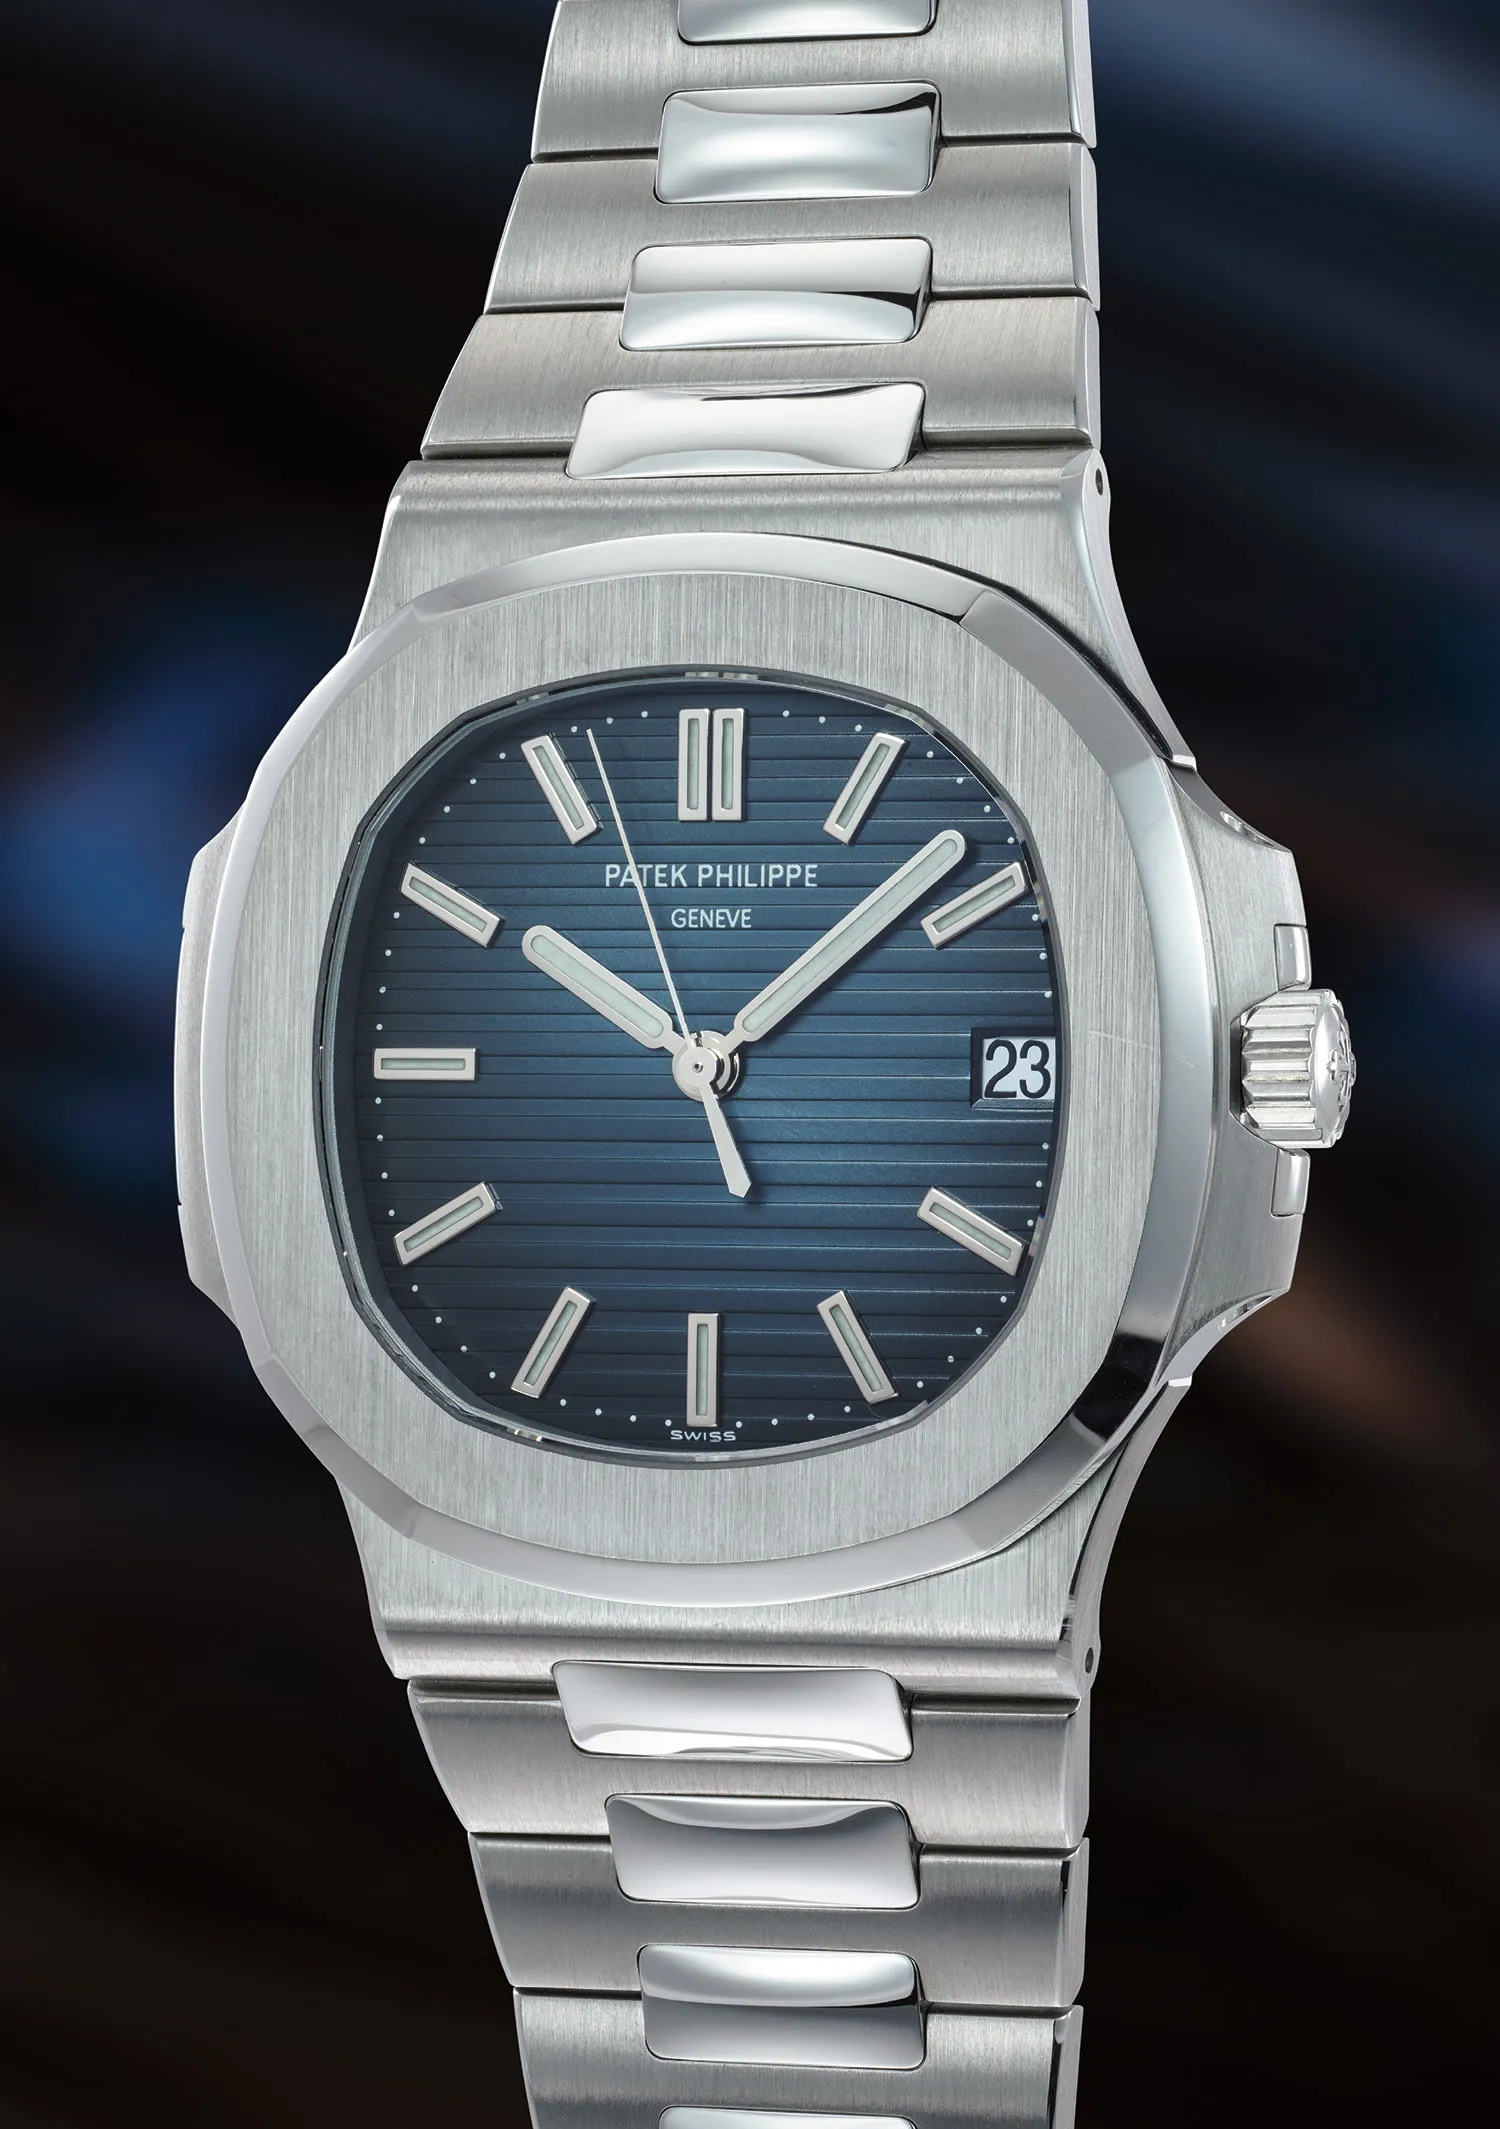 Patek Philippe Nautilus 5711/1A-001 42.5mm Stainless steel